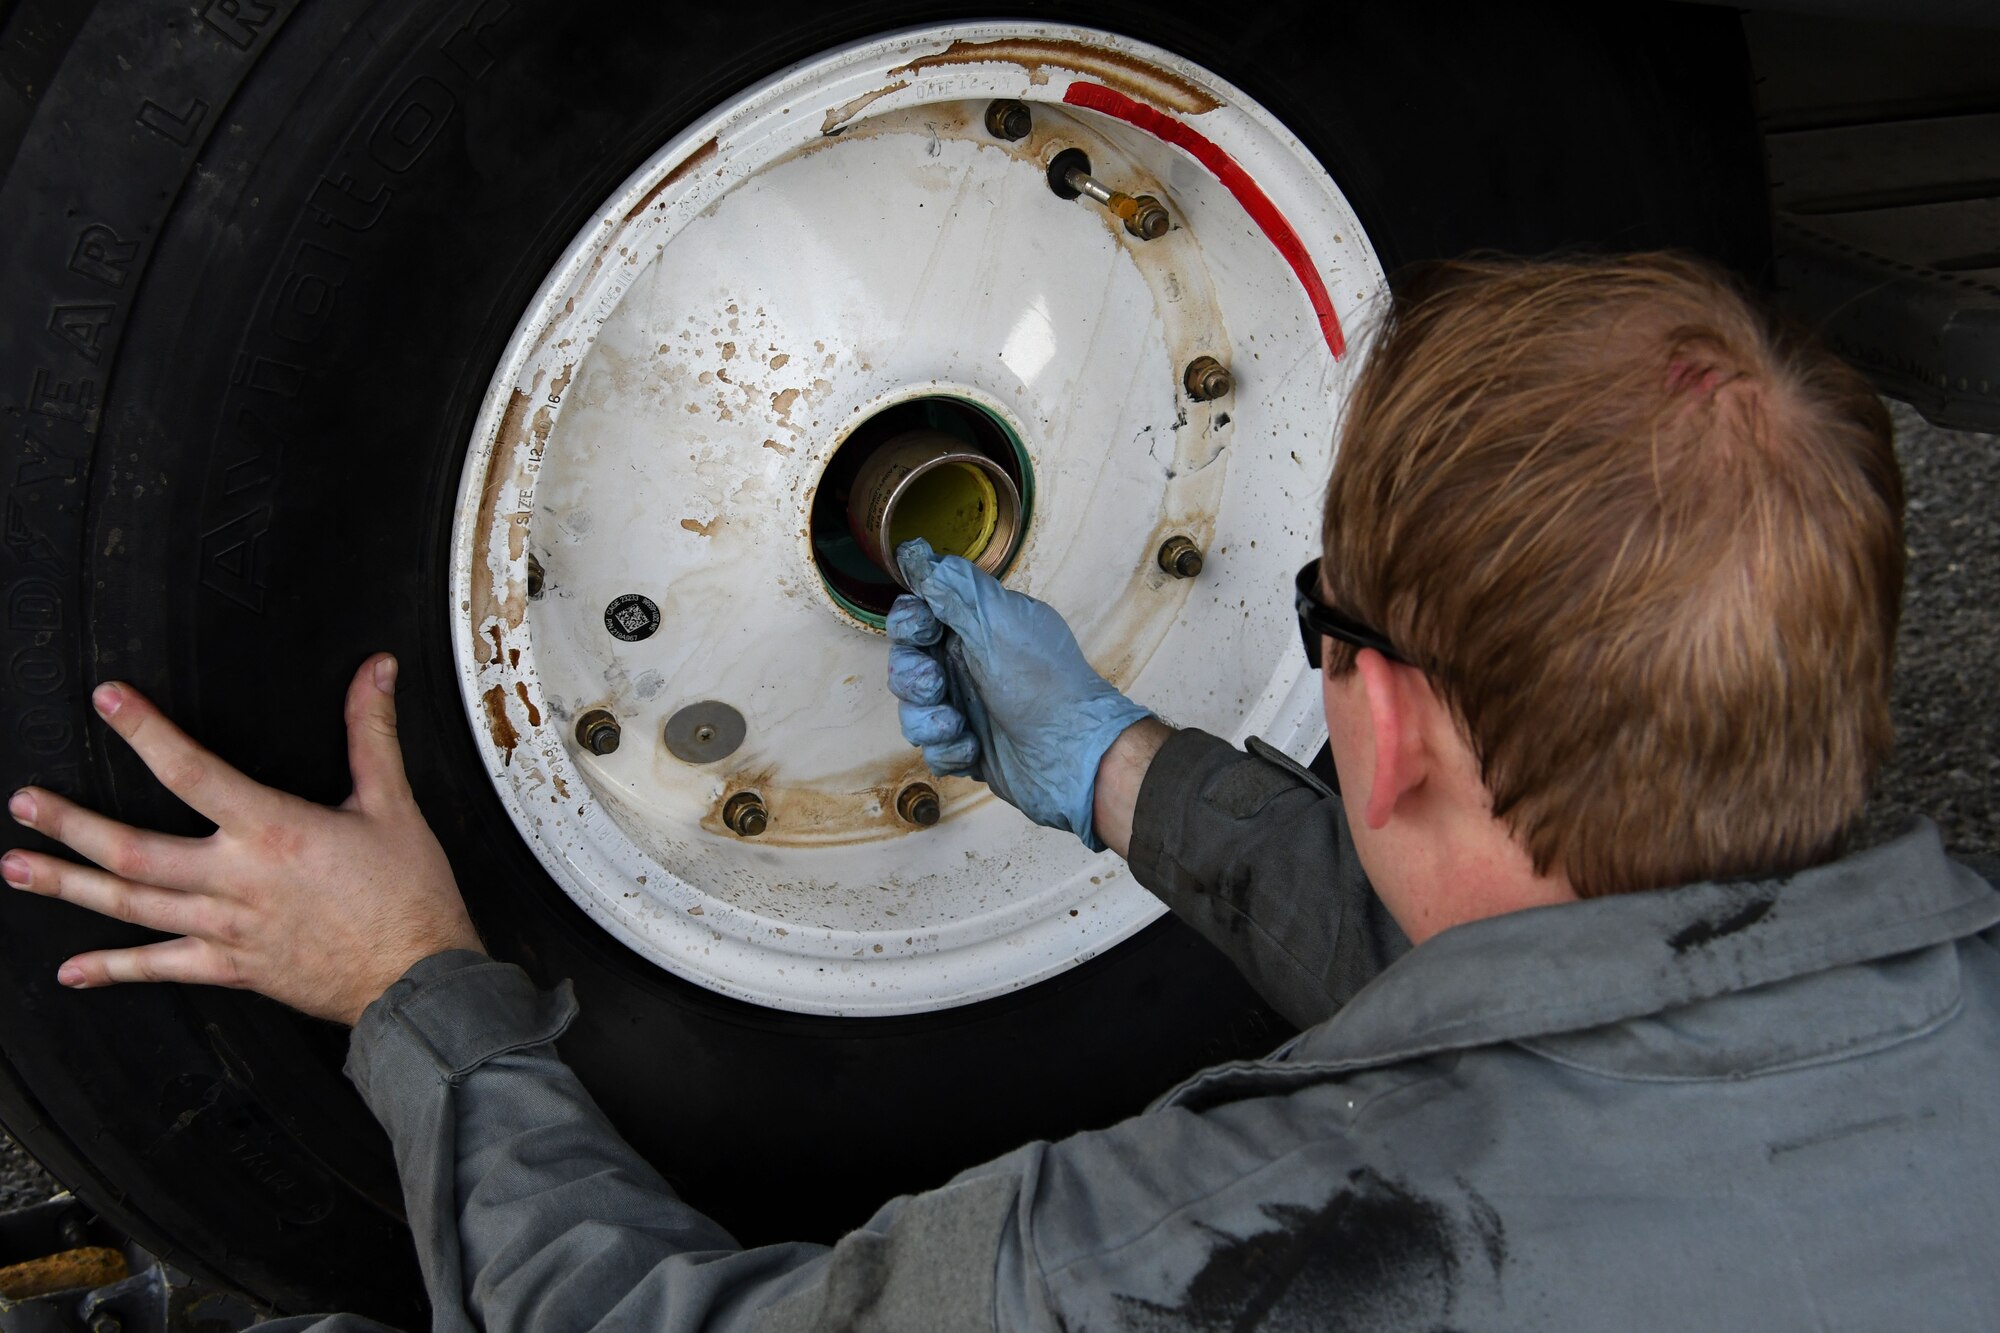 Staff Sgt. Sean Jones, a 386th Expeditionary Aircraft Maintenance Squadron aerospace maintenance craftsman, secures a wheel to the axle of an EC-130H Compass Call Dec. 5, 2016 at an undisclosed location in Southwest Asia. The EC-130s are regularly moved between the 386th and Davis-Monthan Air Force Base. (U.S. Air Force photo/Senior Airman Andrew Park)